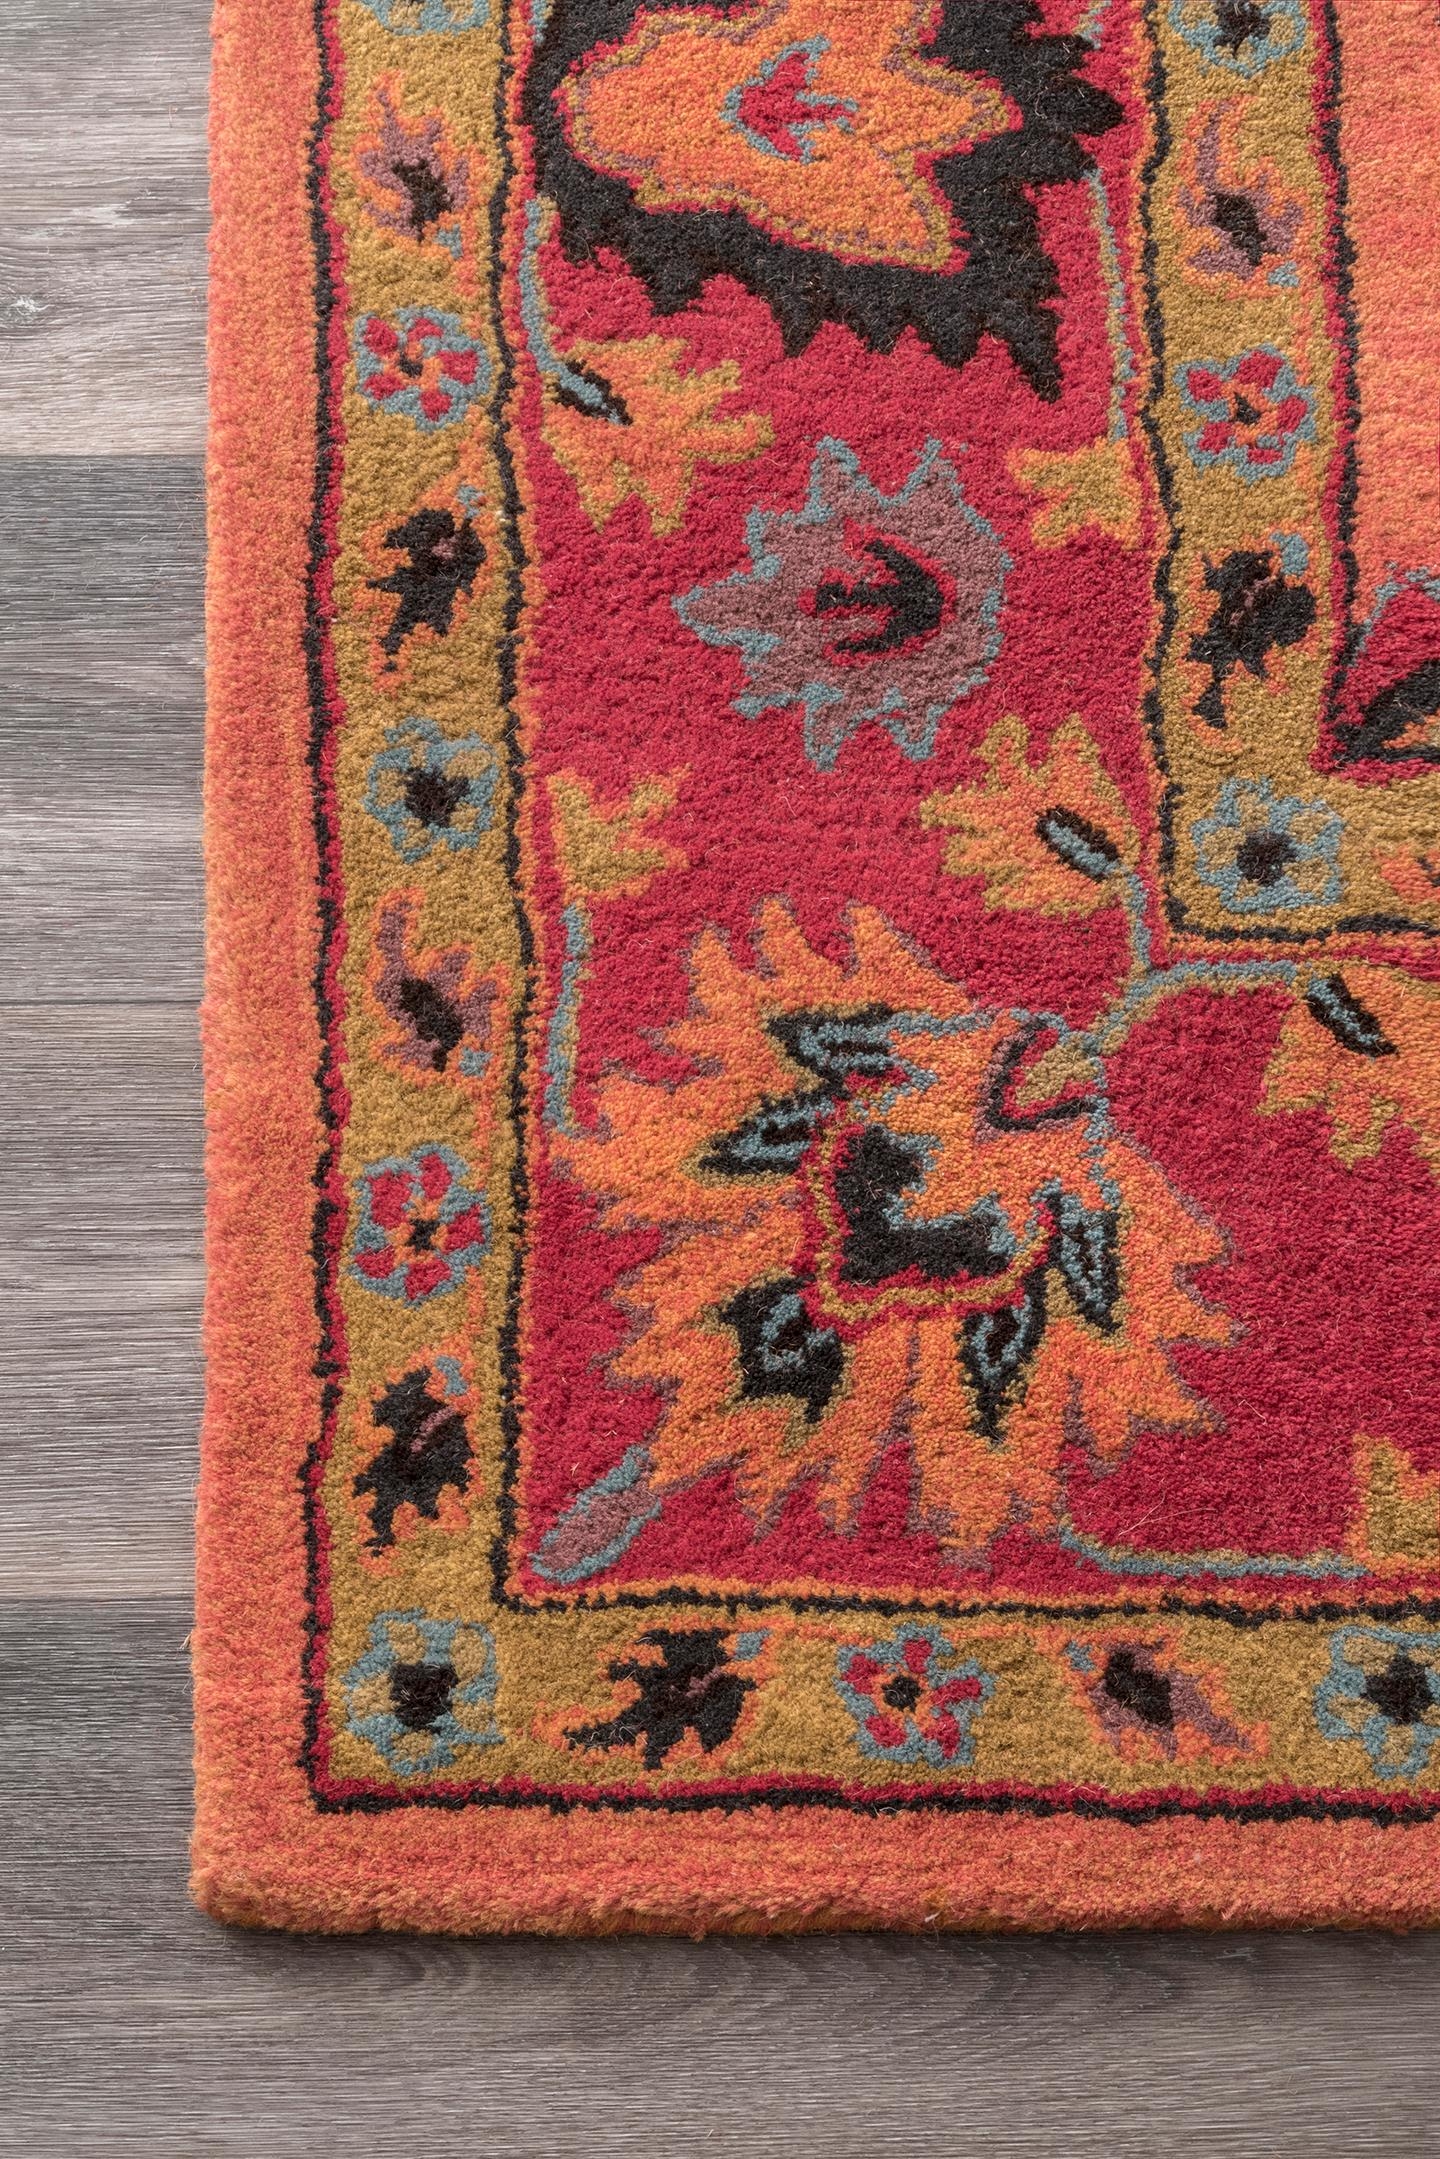 Hand Tufted Montesque Area Rug - Image 2